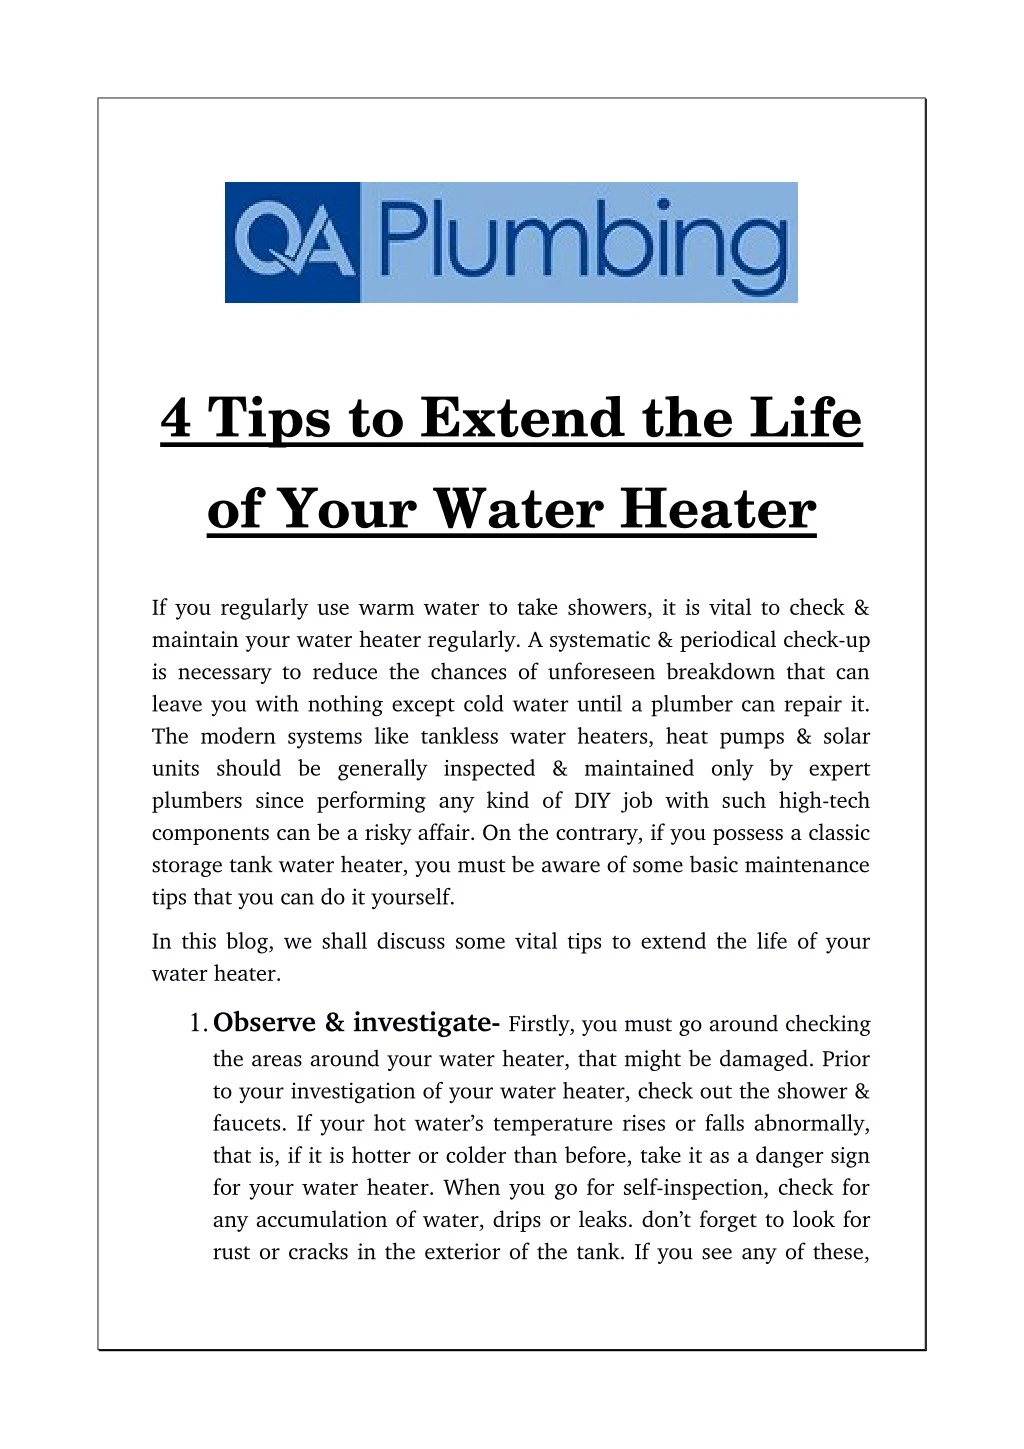 4 tips to extend the life of your water heater